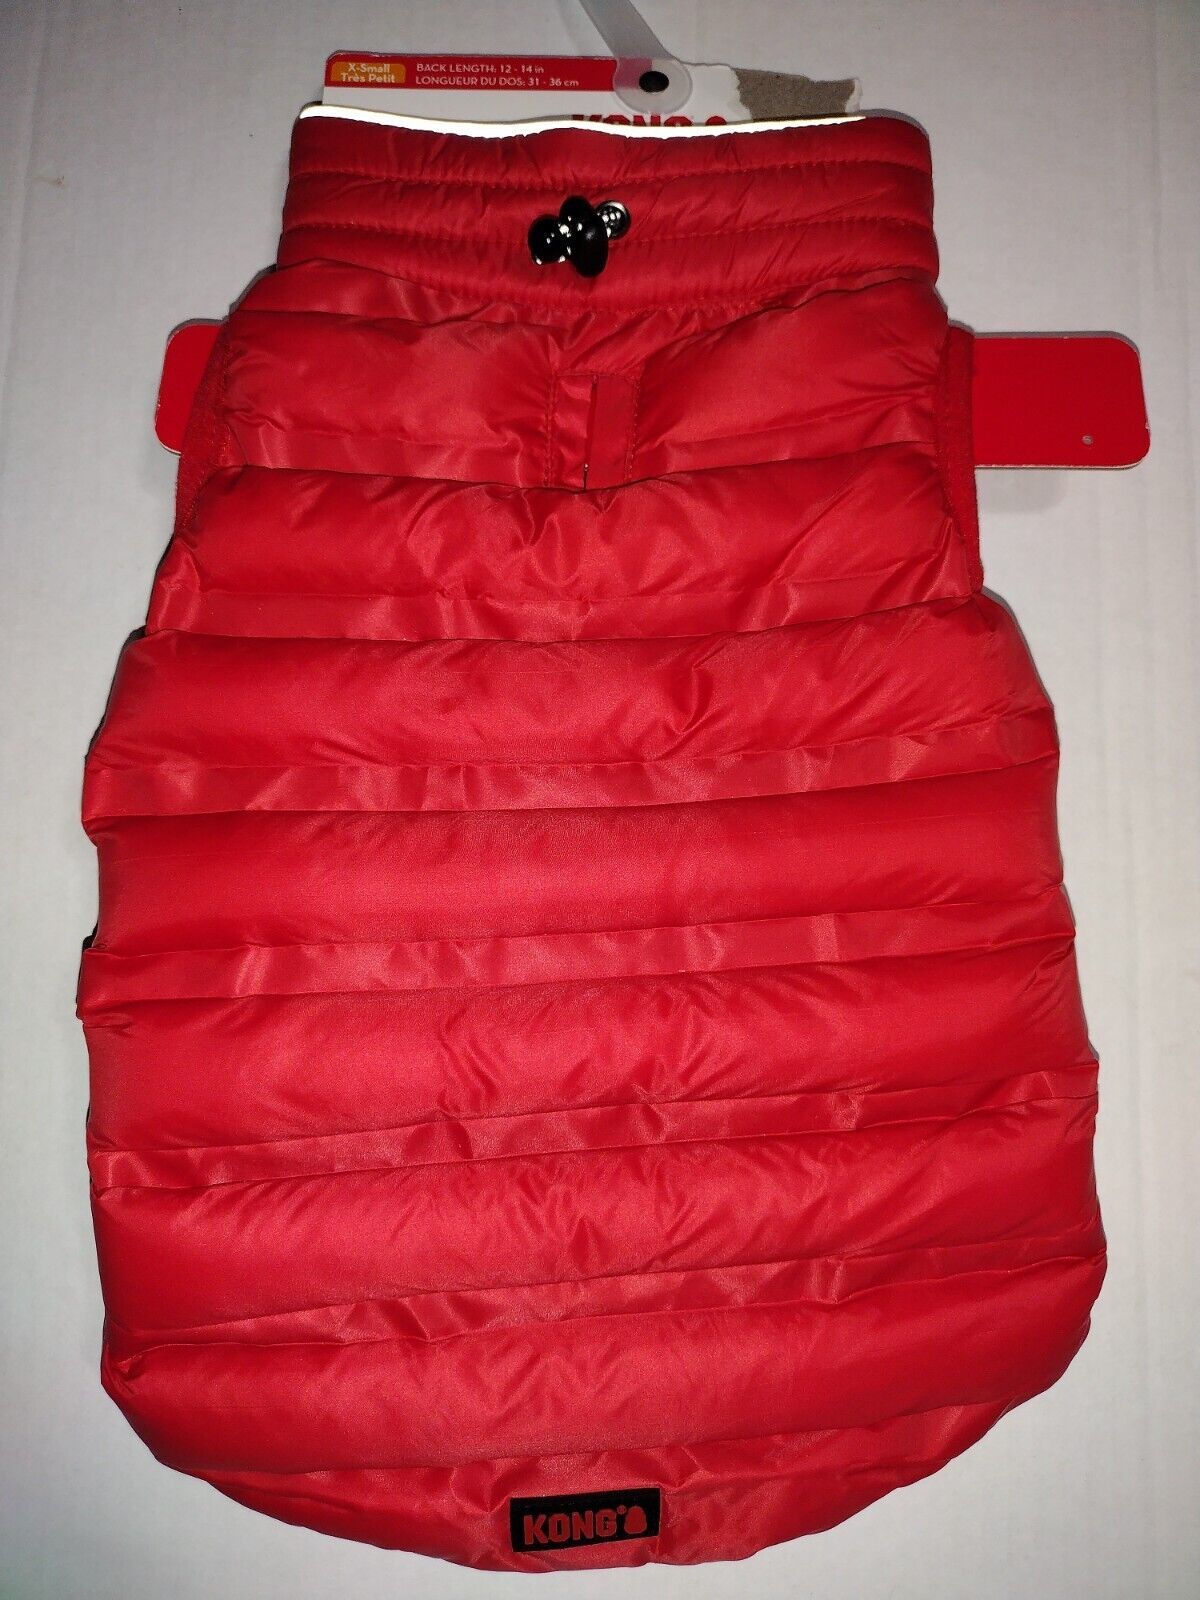 Primary image for KONG DOG RED JACKET PARACHUTE PUFFER OUTERWEAR INSULATED SIZE XS